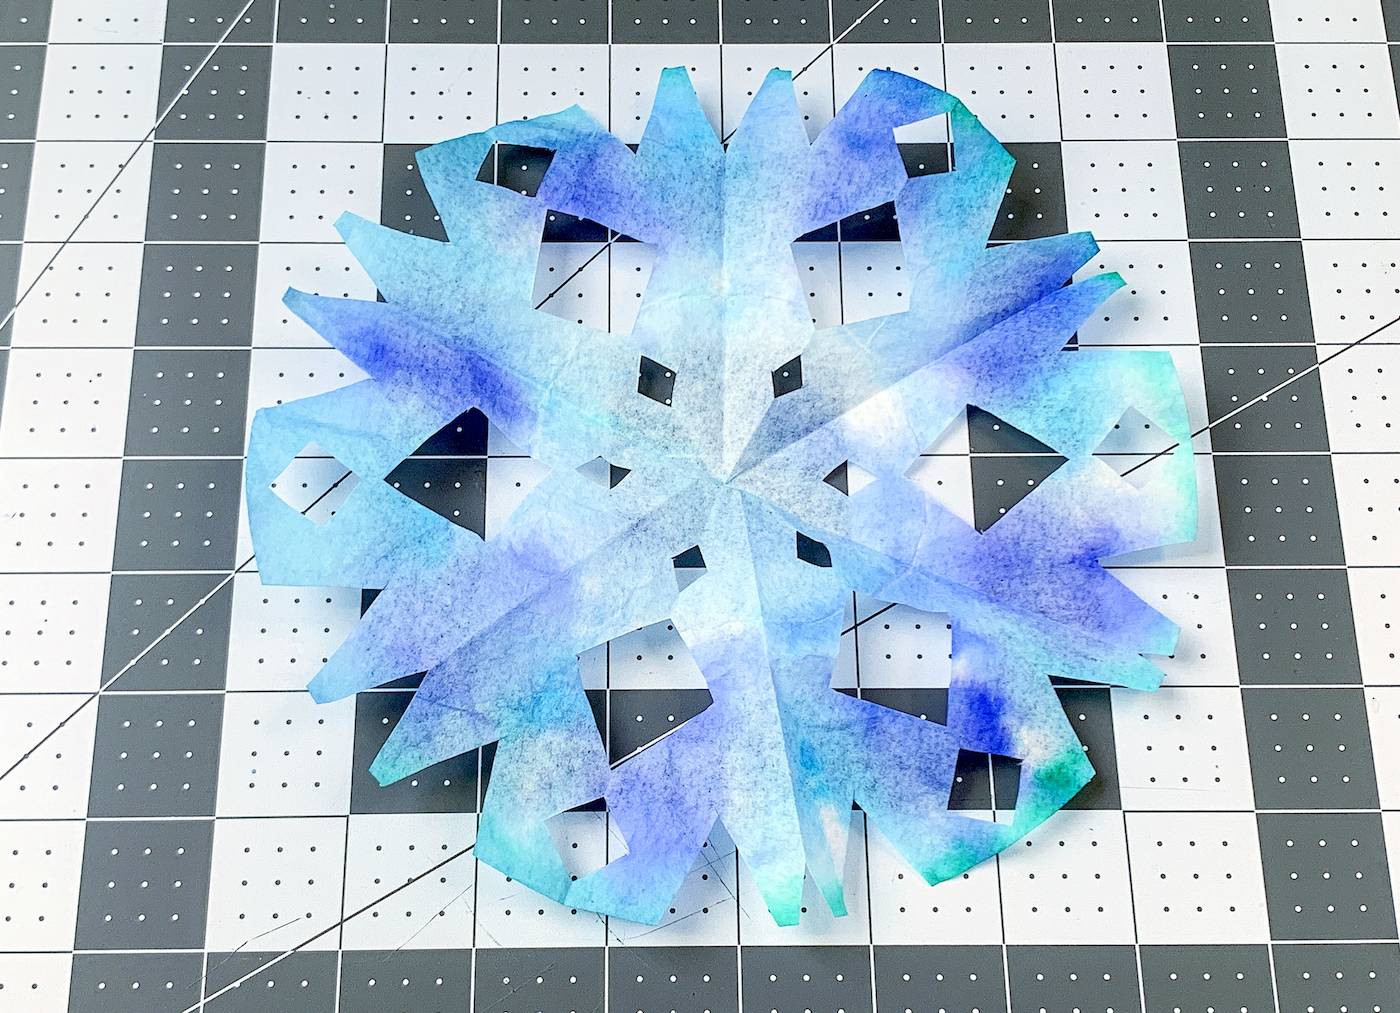 Coffee filter cut into a snowflake